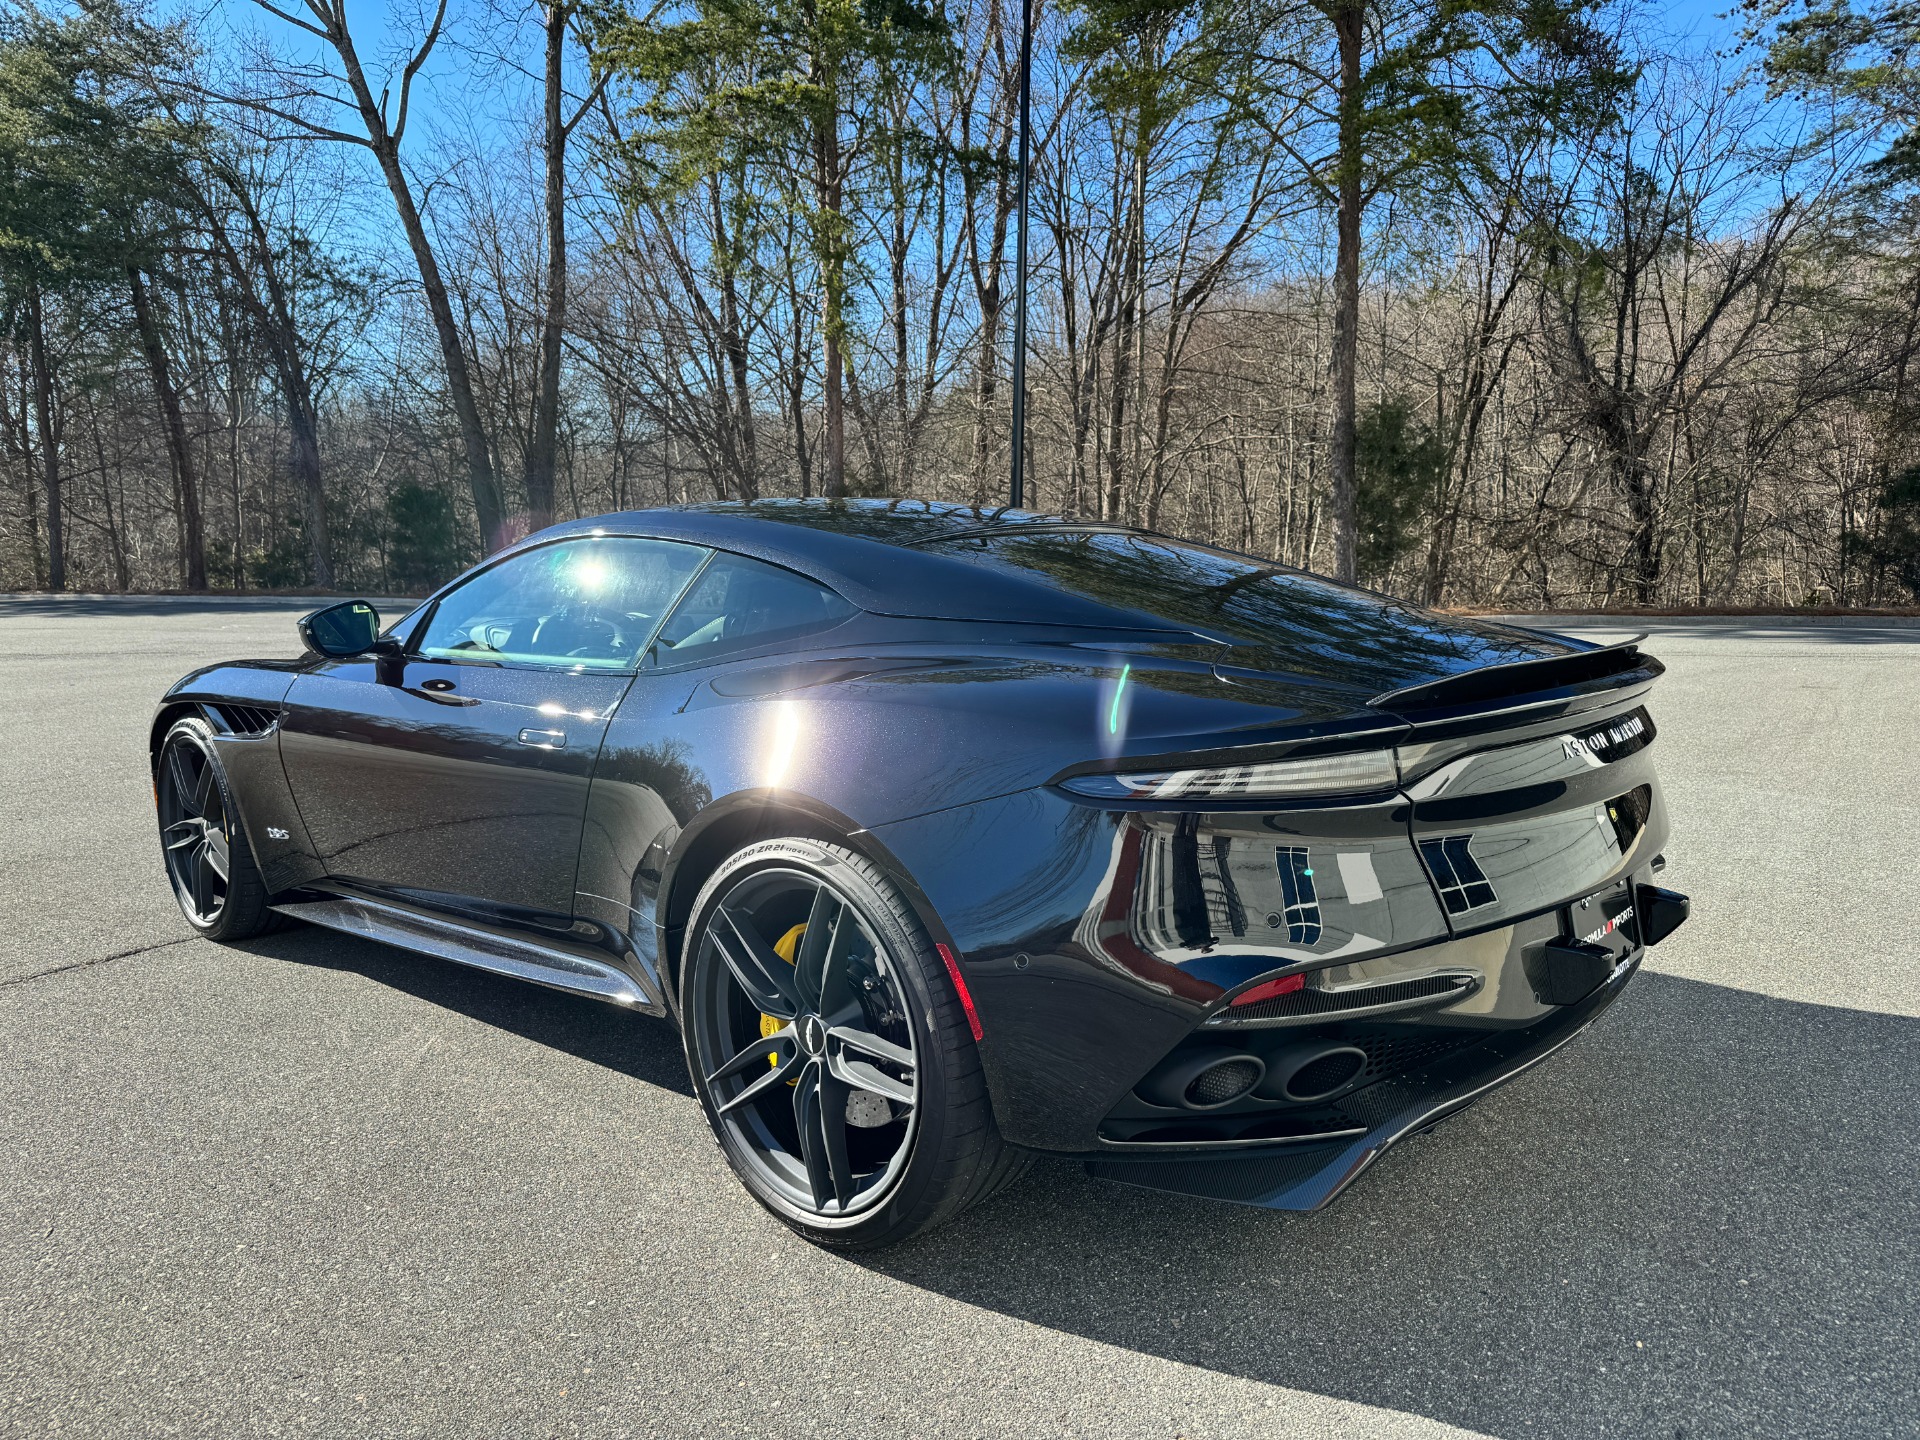 Used 2020 Aston Martin DBS SUPERLEGGERA / CARBON FIBER / V12 750HP / ACCENT STITCHING for sale $240,000 at Formula Imports in Charlotte NC 28227 6